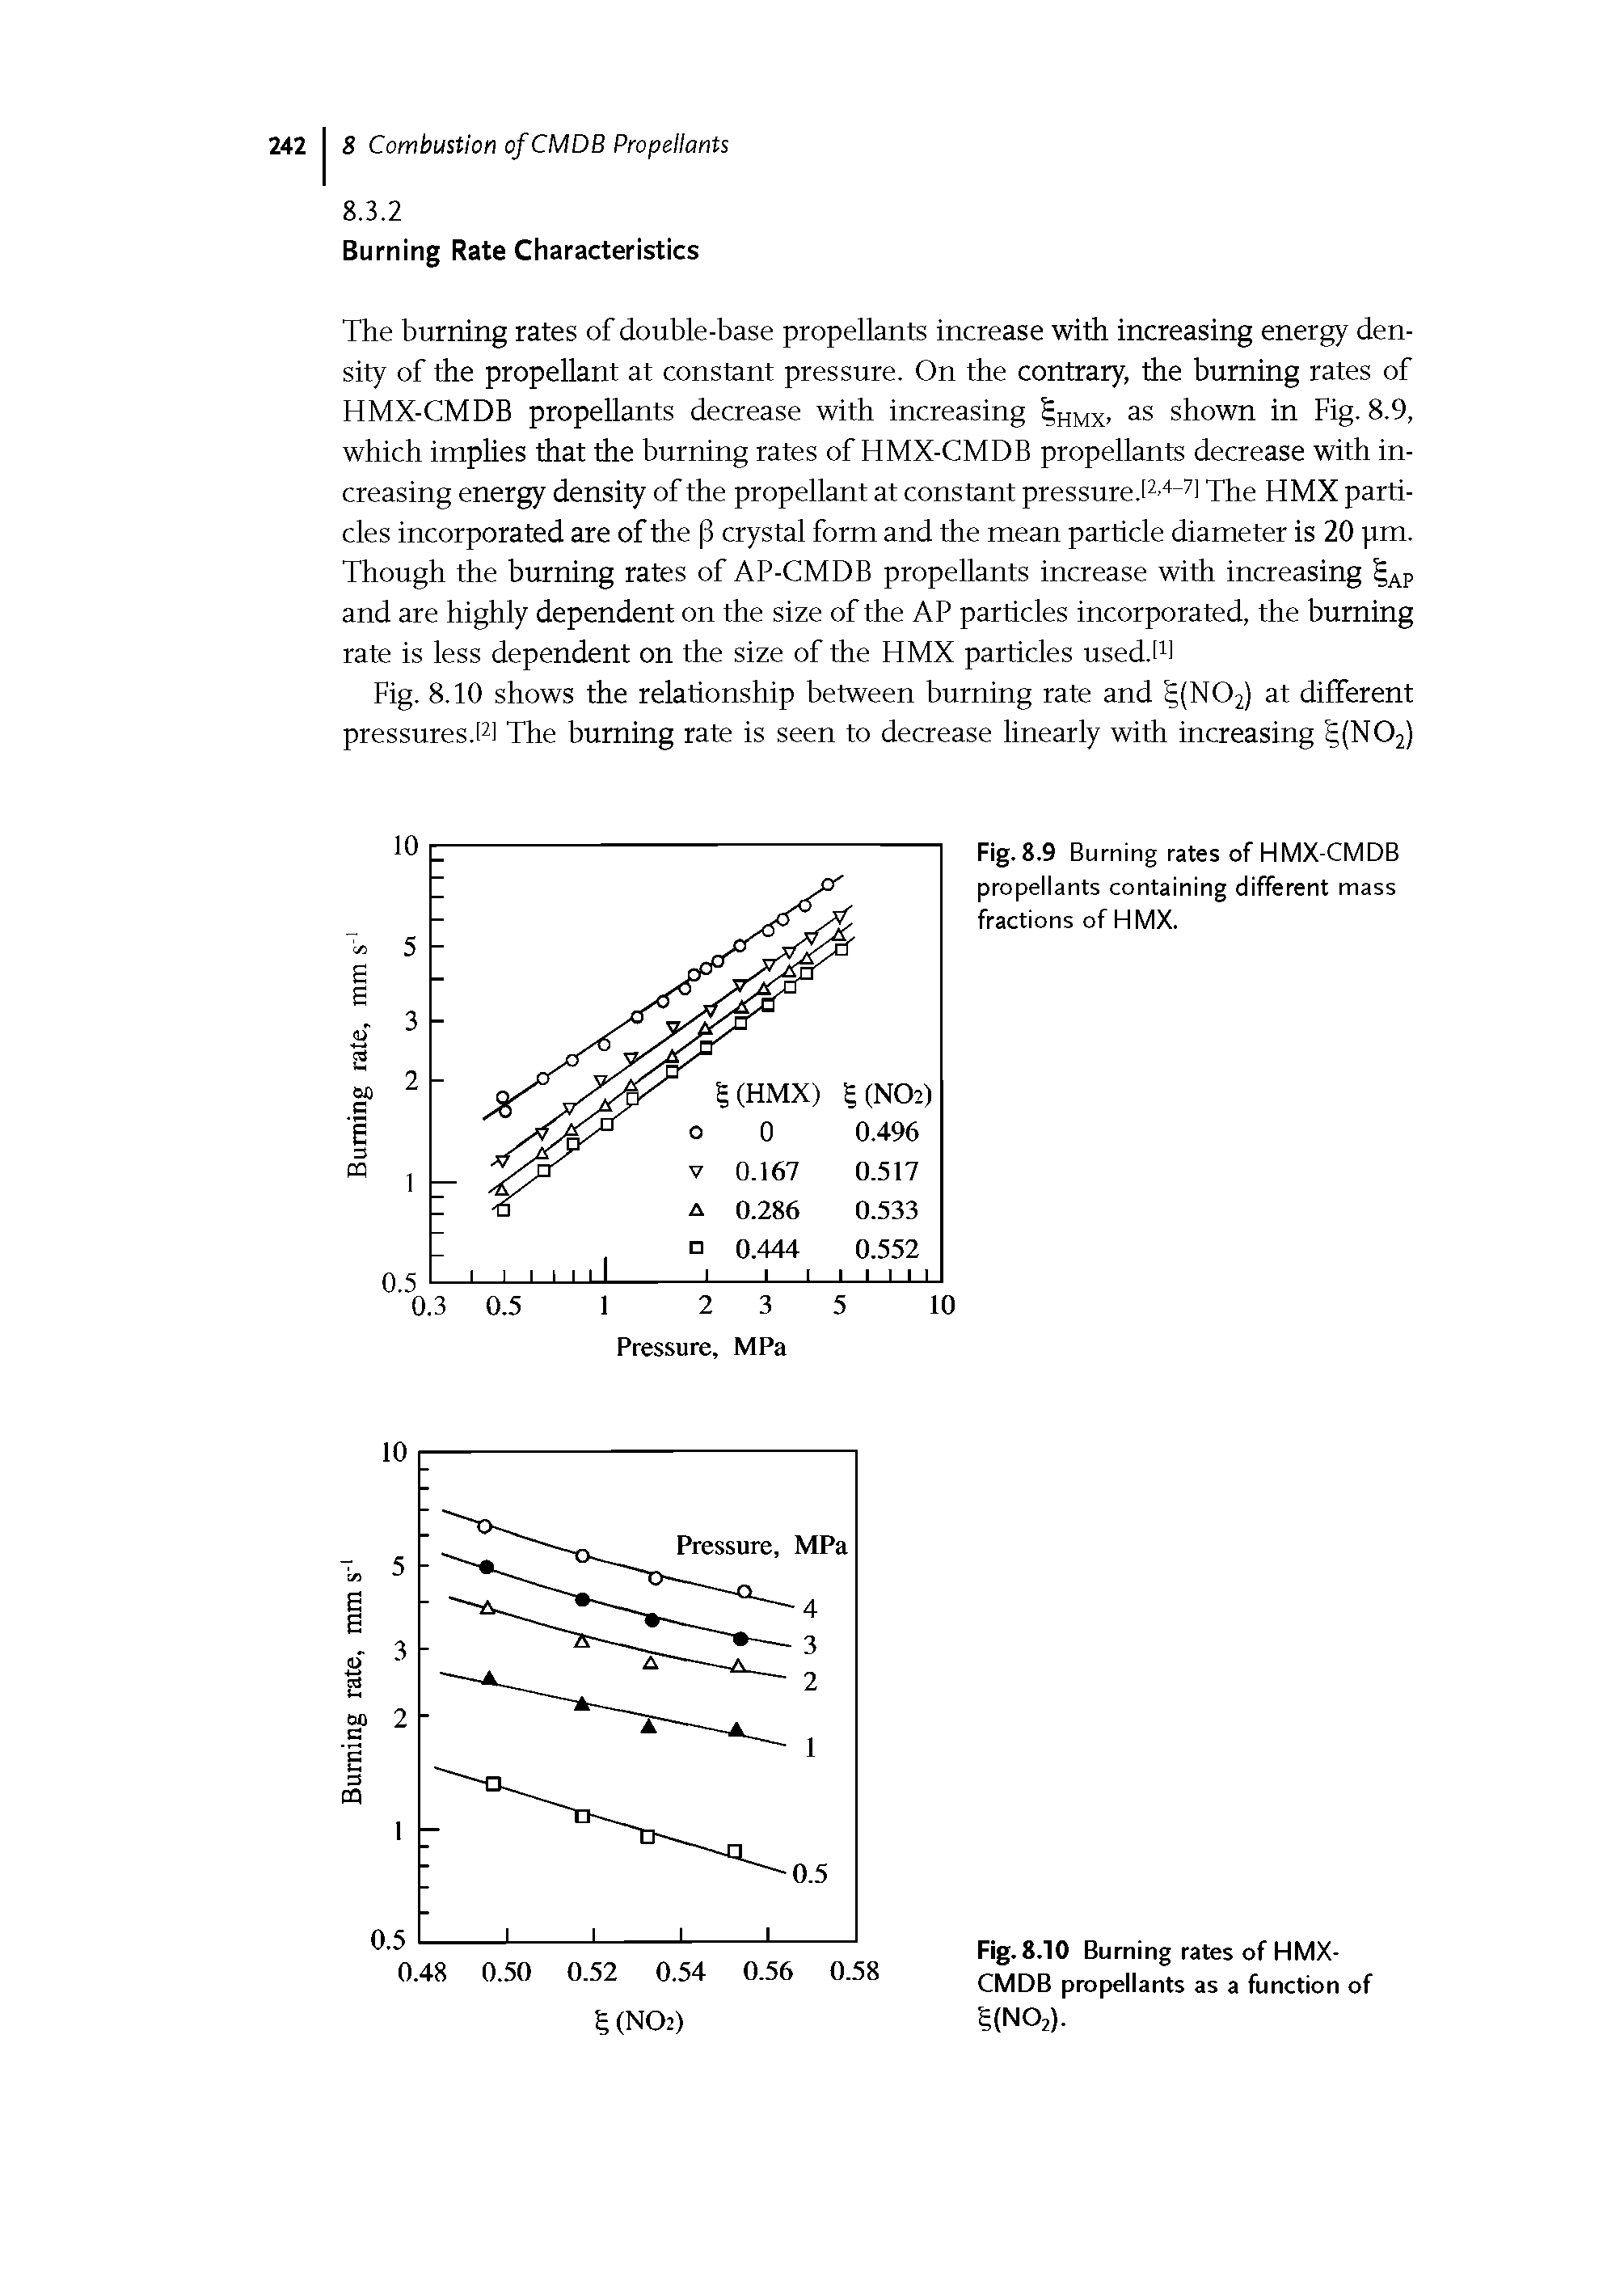 Fig.8.9 Burning rates of HMX-CMDB propellants containing different mass fractions of HMX.